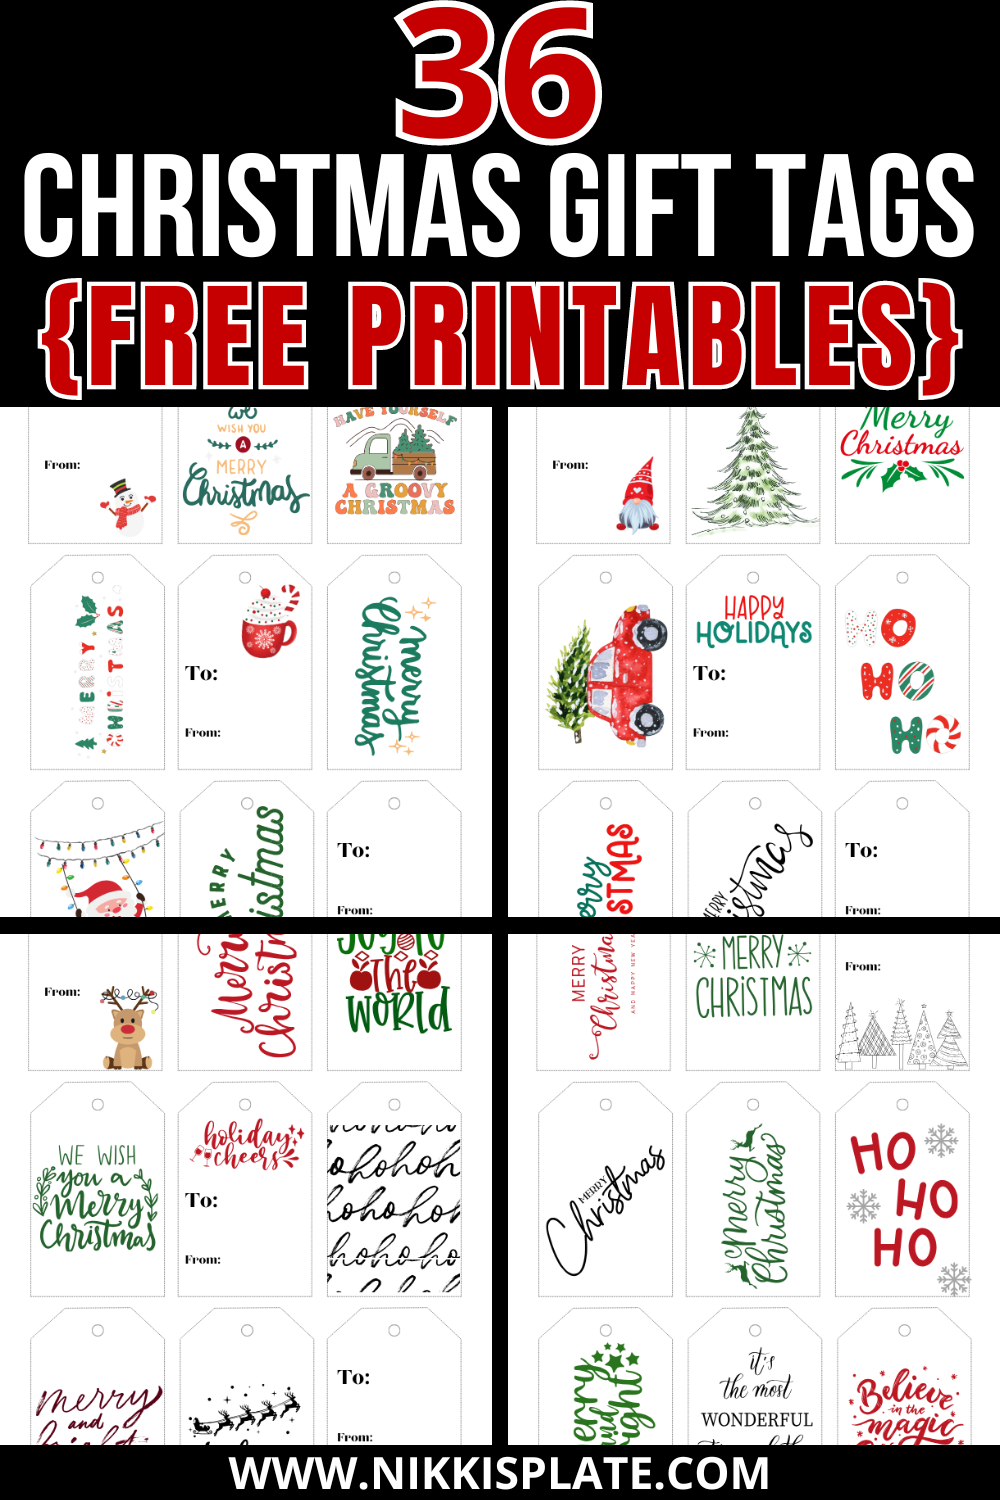 Free Printable Christmas Gift Tags: Add a Personal Touch to Your